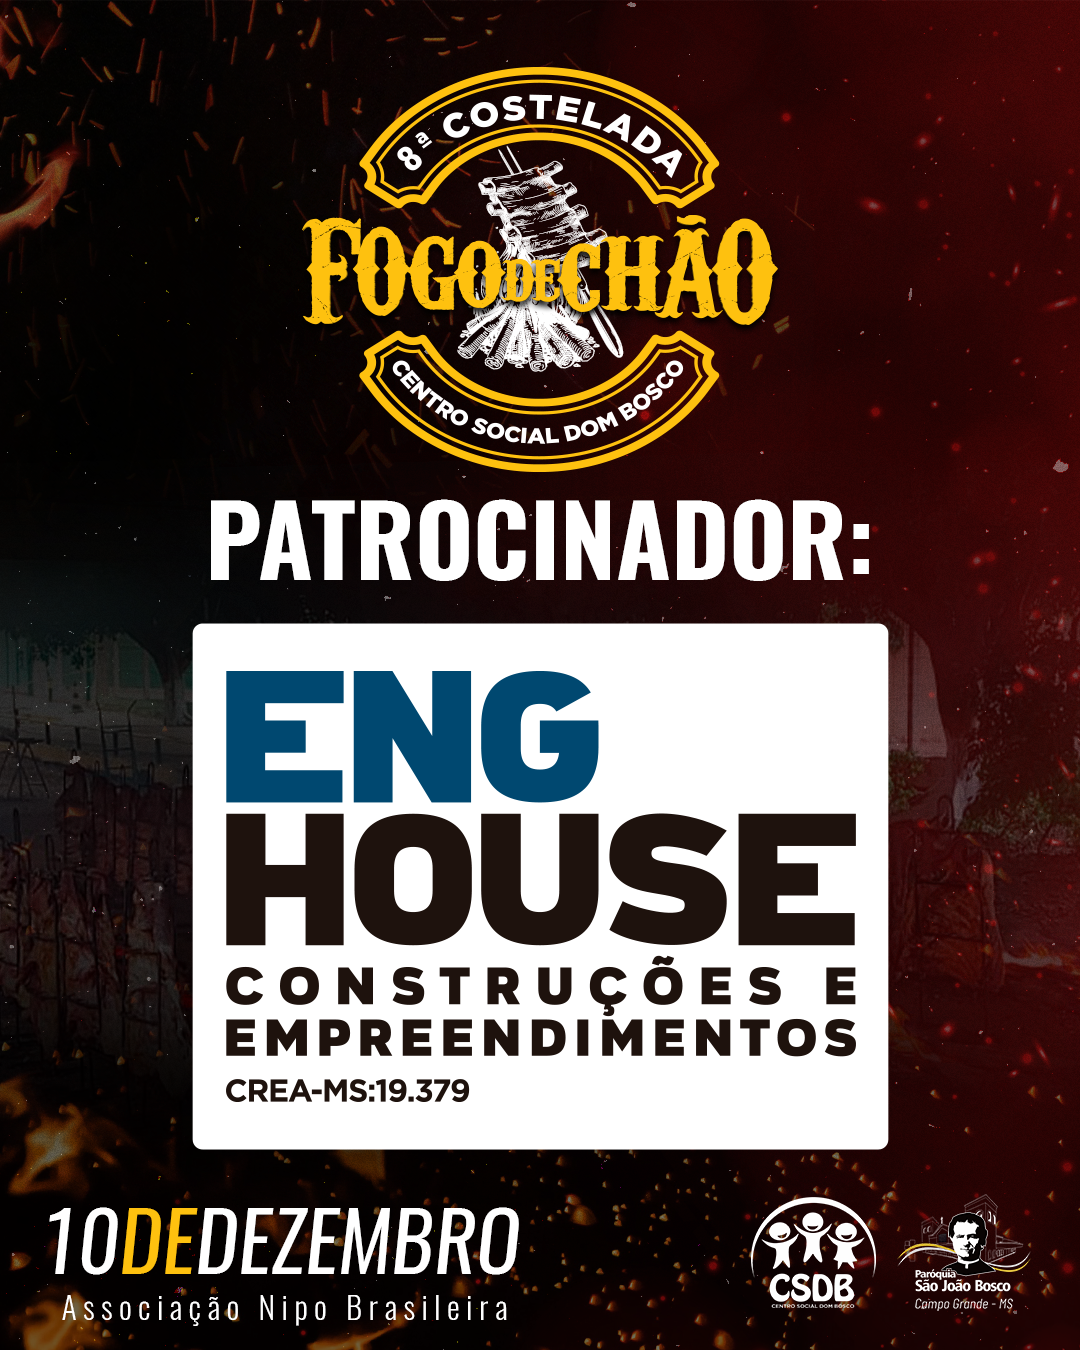 ENG-HOUSE